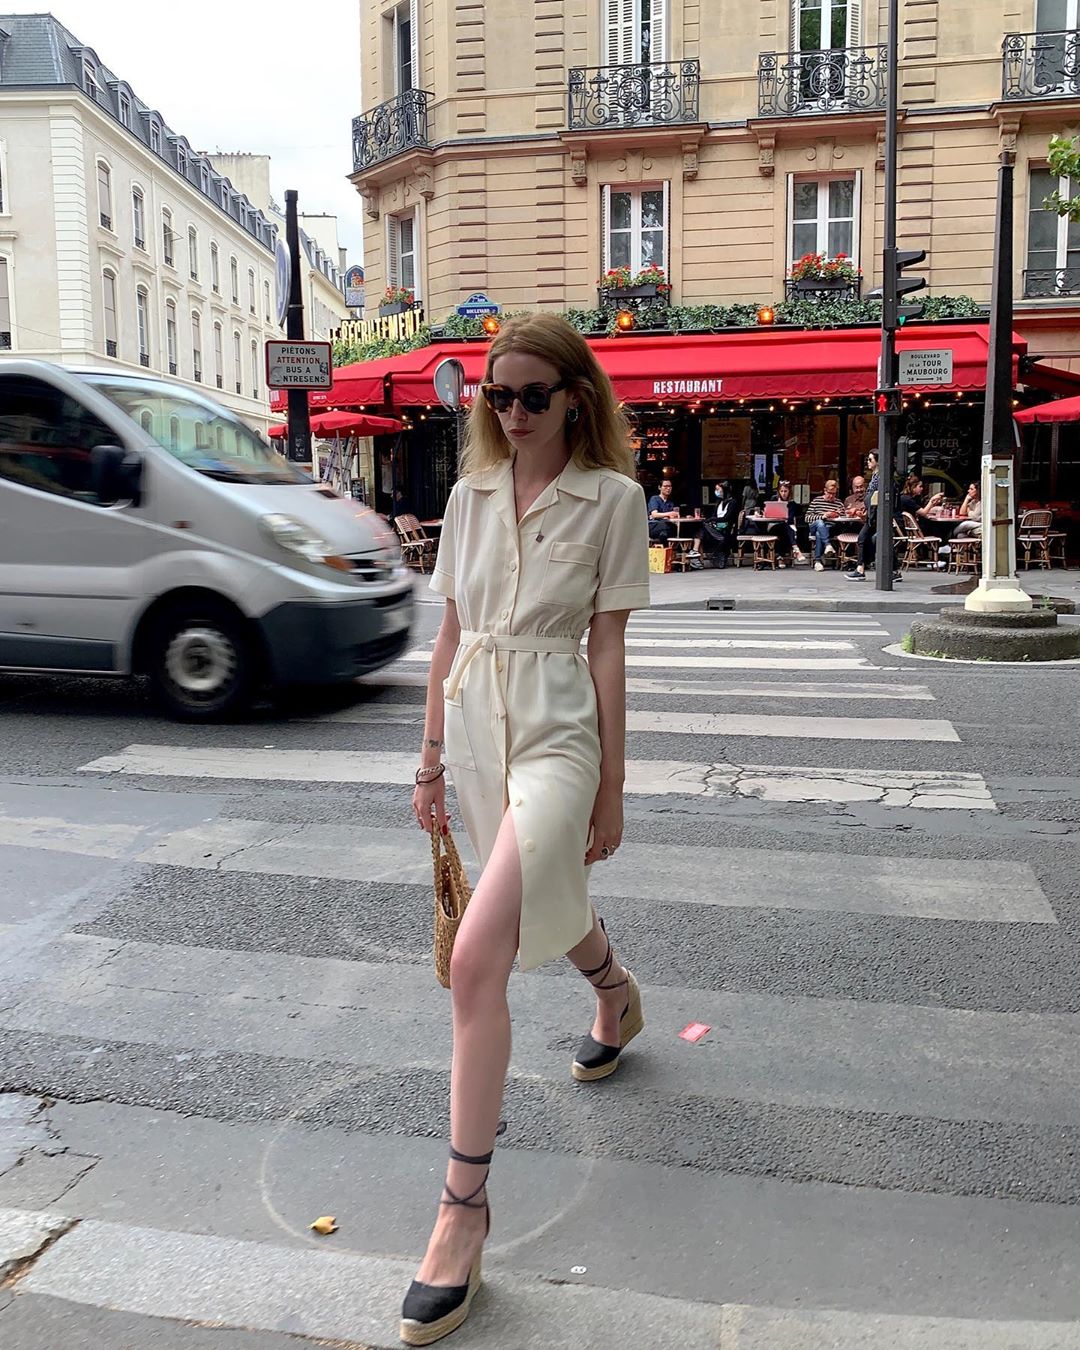 I’m Obsessed With Shirtdresses Thanks To This Chic French Girl